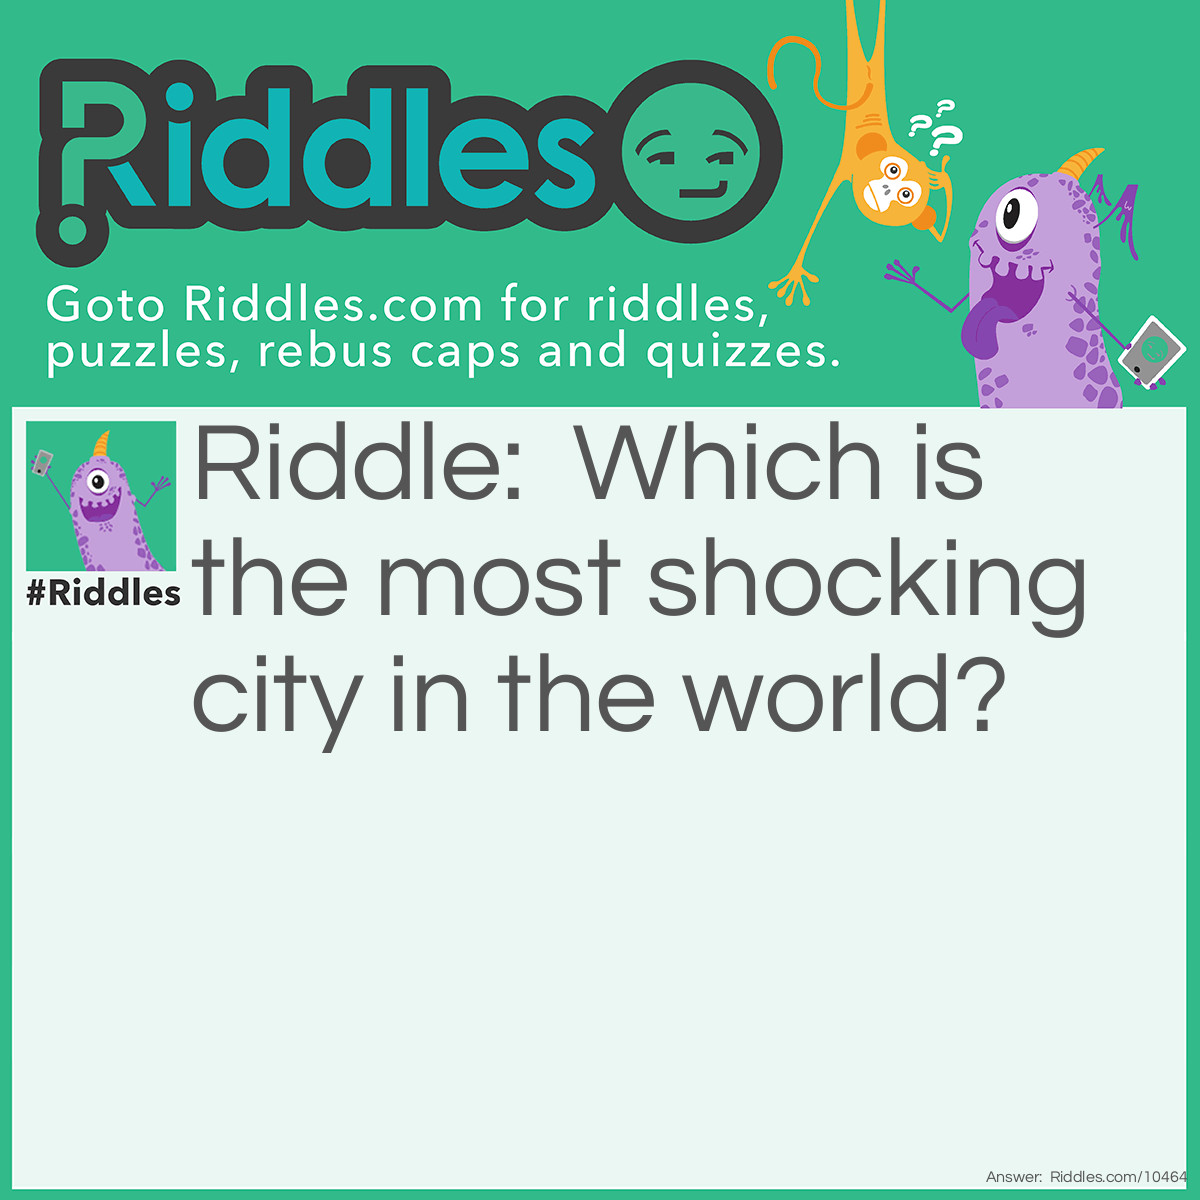 Riddle: Which is the most shocking city in the world? Answer: Electricity!